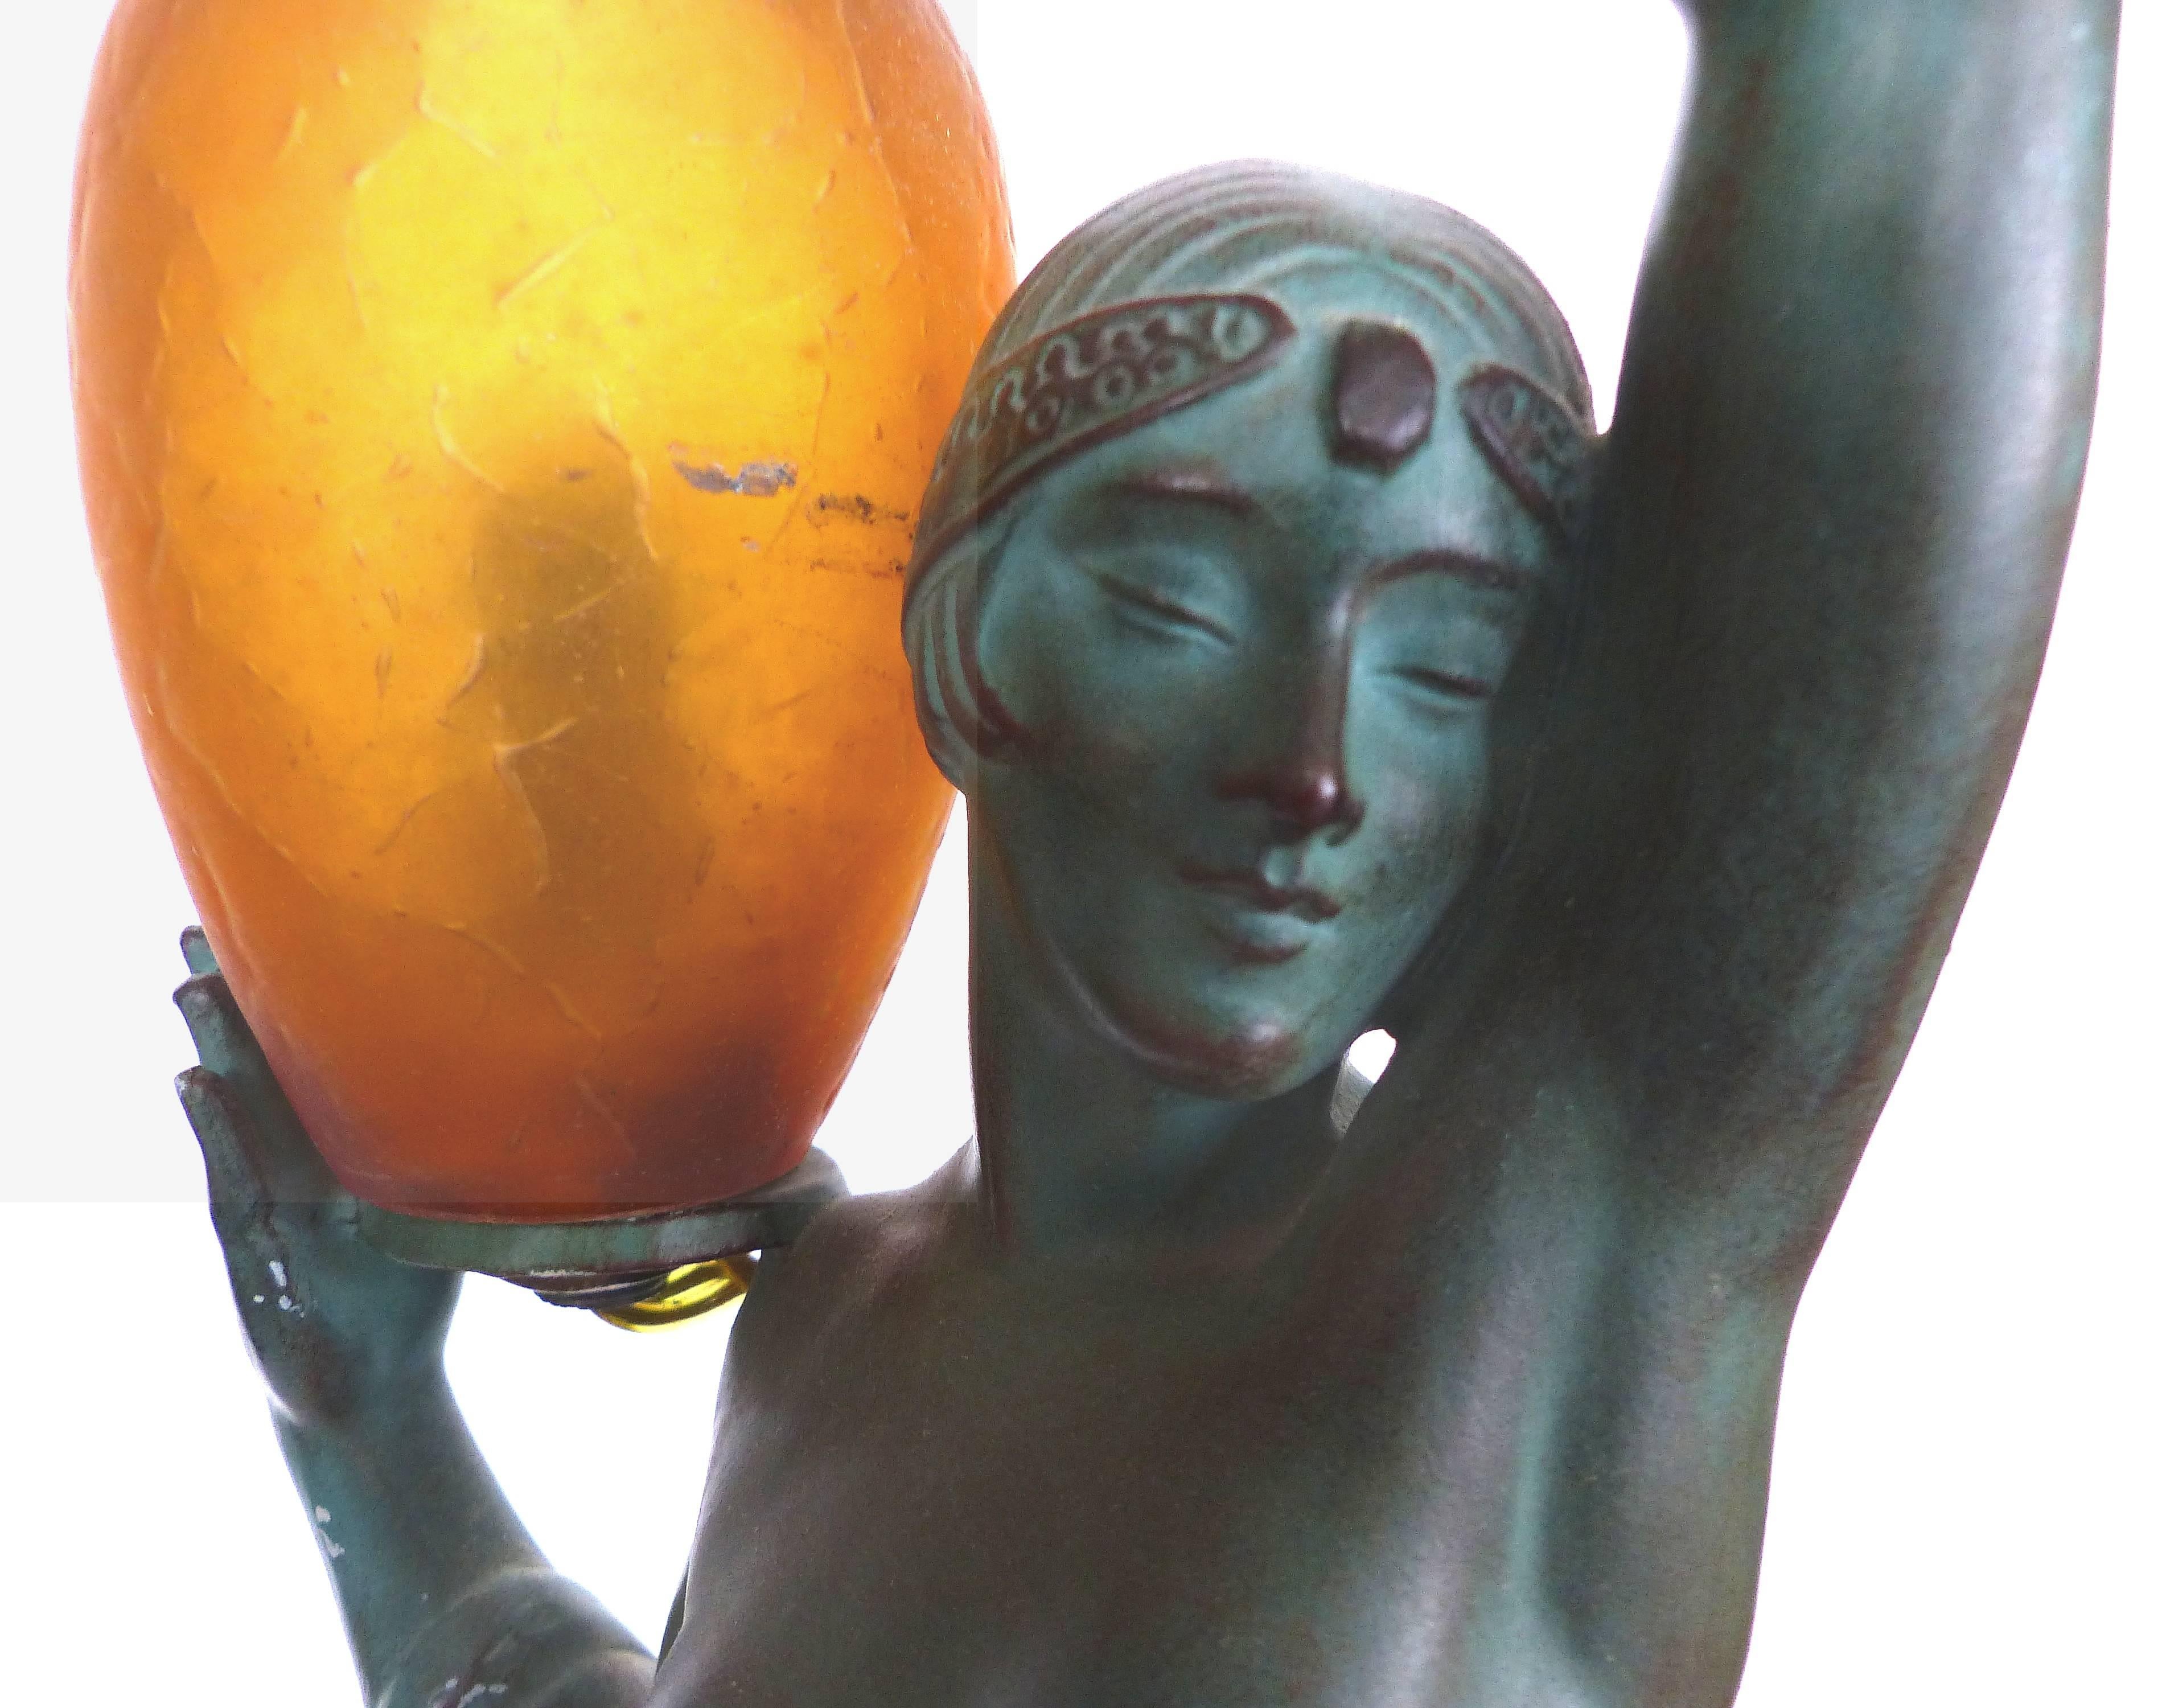 Pierre Lefaguay Daum Glass French Art Deco Lighted Sculpture

This French Art Deco illuminated metal statue was sculpted by Pierre Le Faguays (1892 – 1935) and cast by the LeVerre foundry in the 1920s. The statue, named “Odalisque” depicts a young